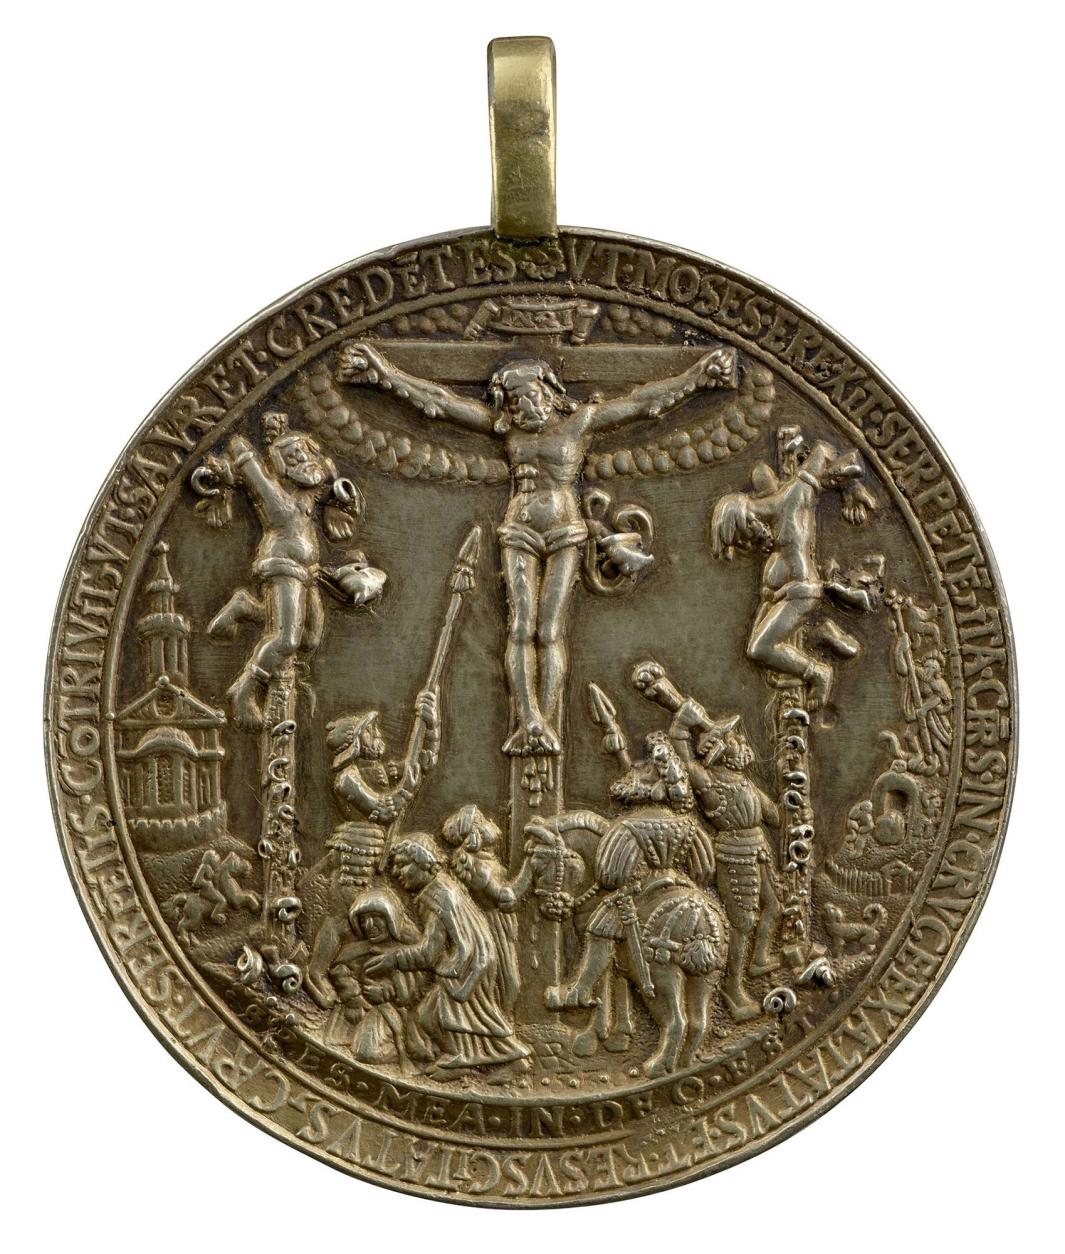 Gilt-silver medal depicting the Crucifixion with soldiers 